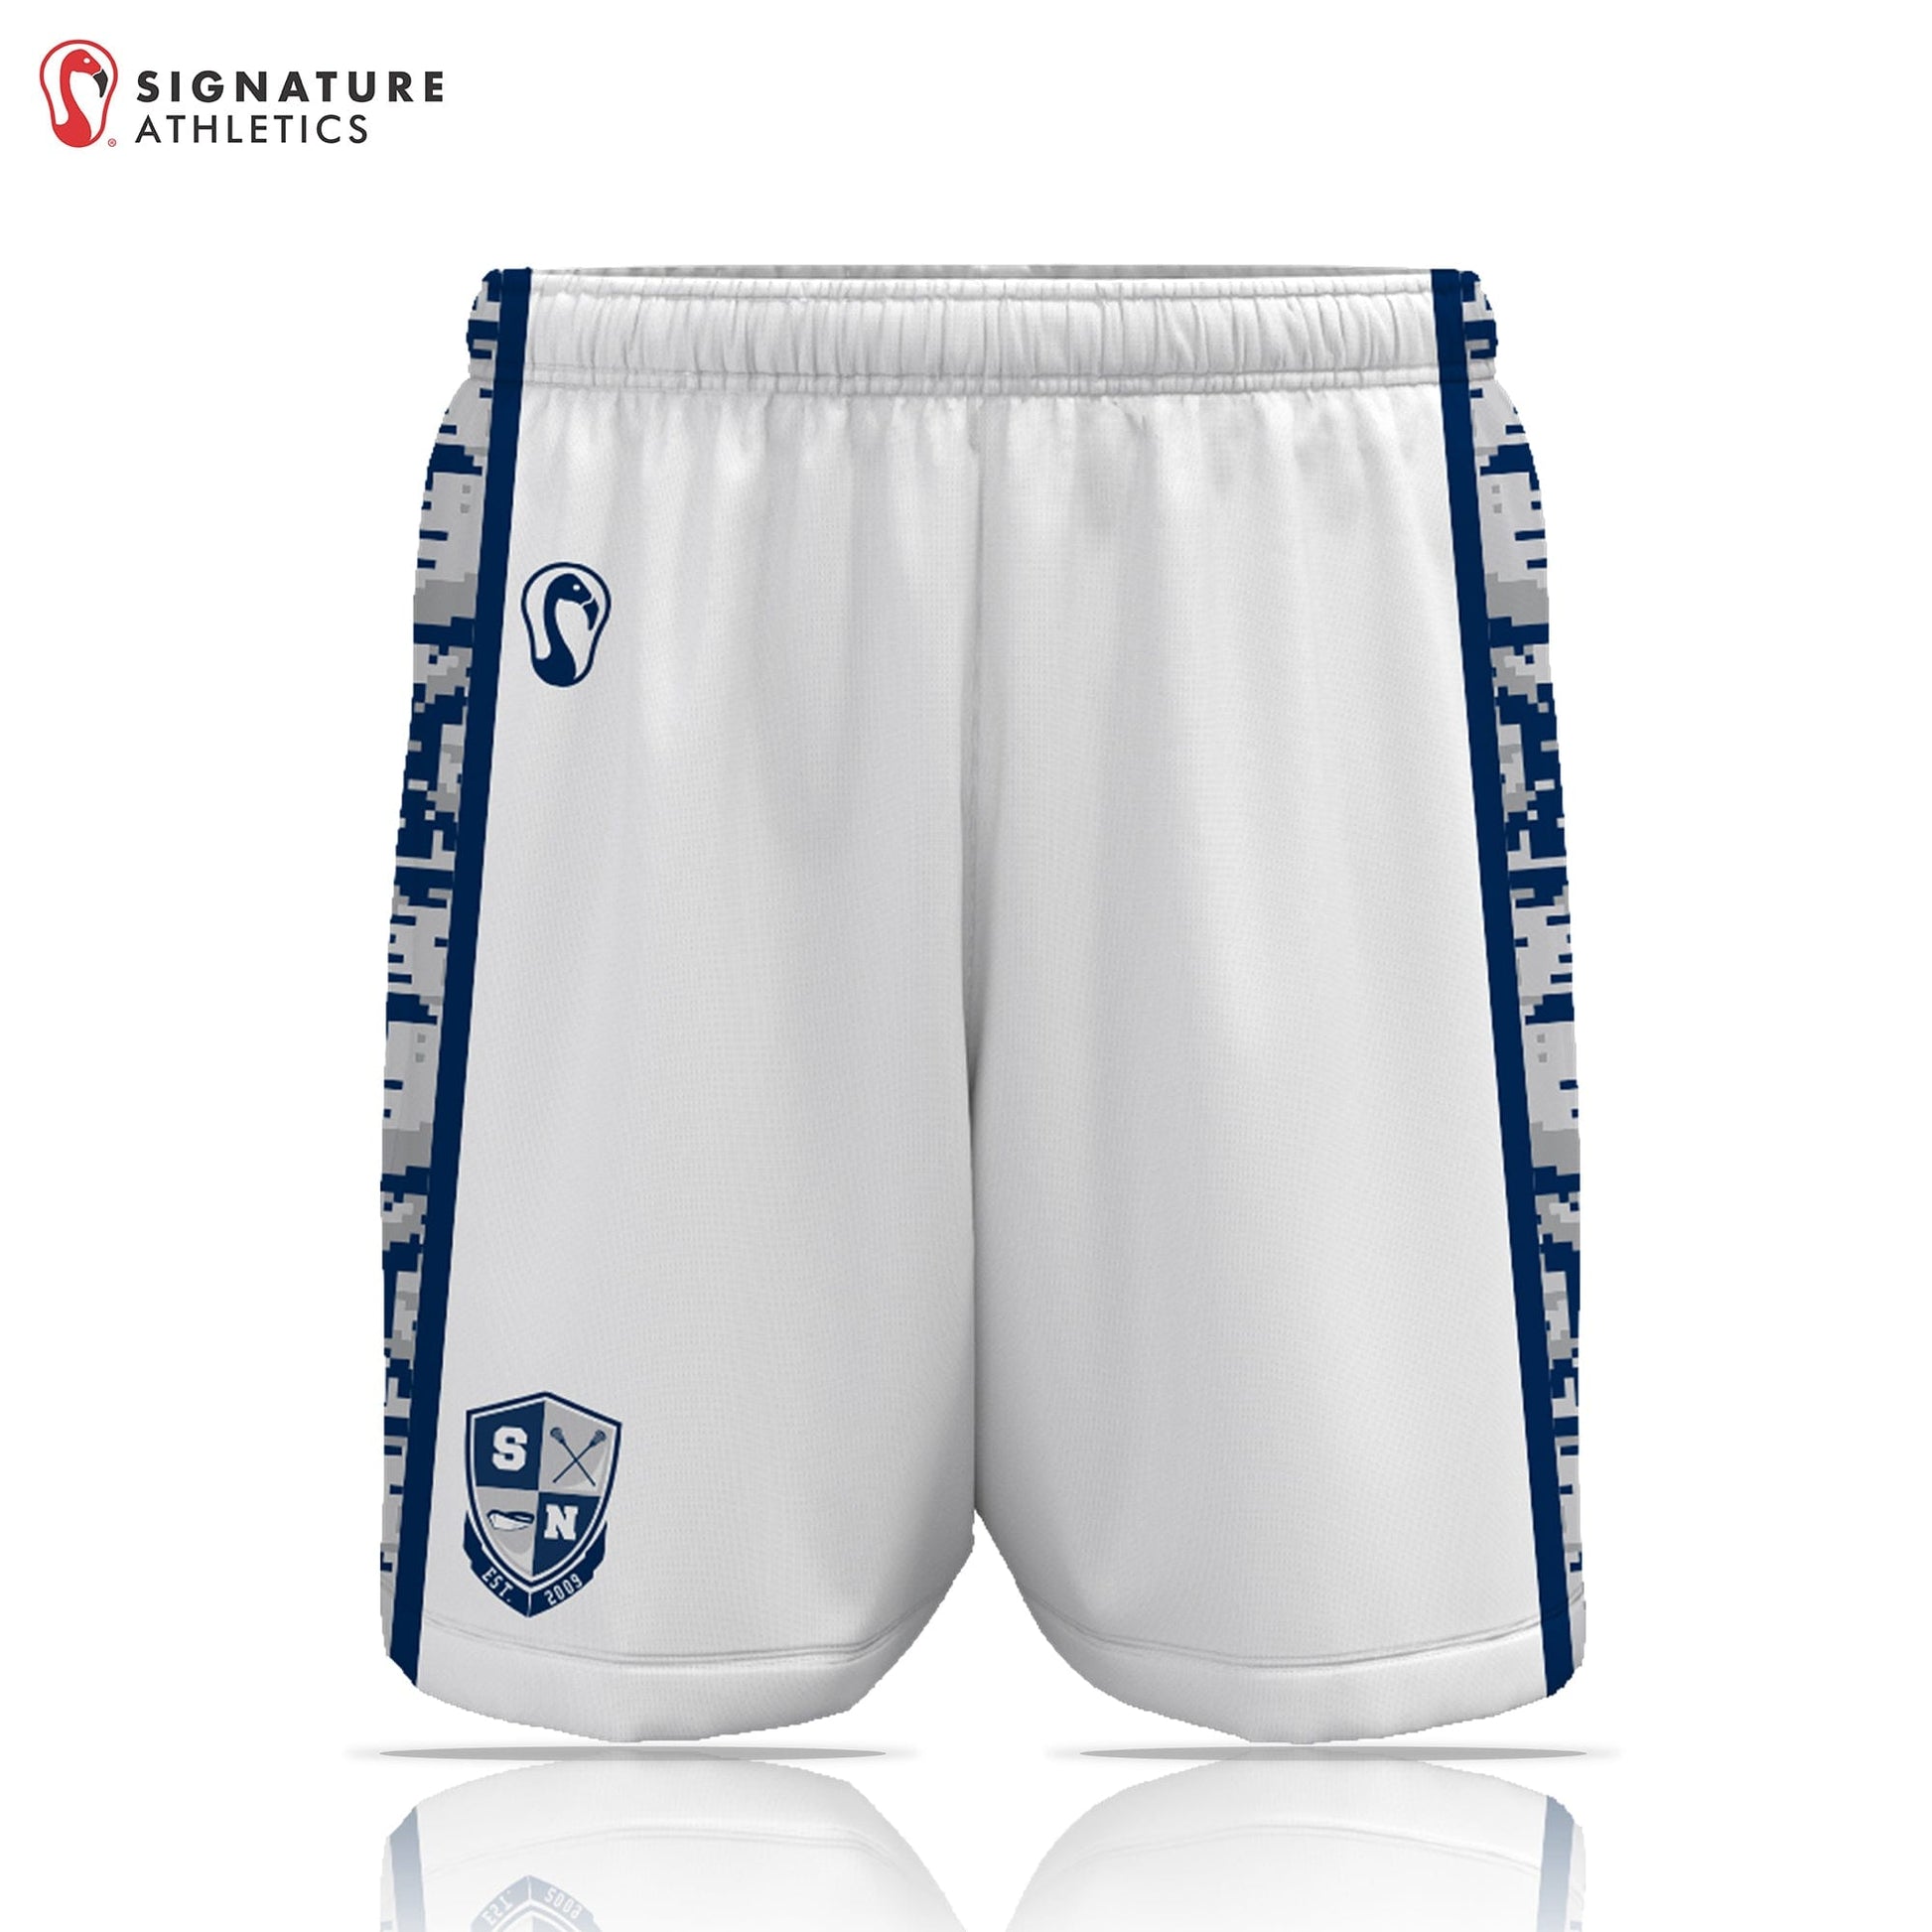 SNYL Team Swag Store Men's Performance Game Shorts (Sold Seperately):Boys U13 Signature Lacrosse